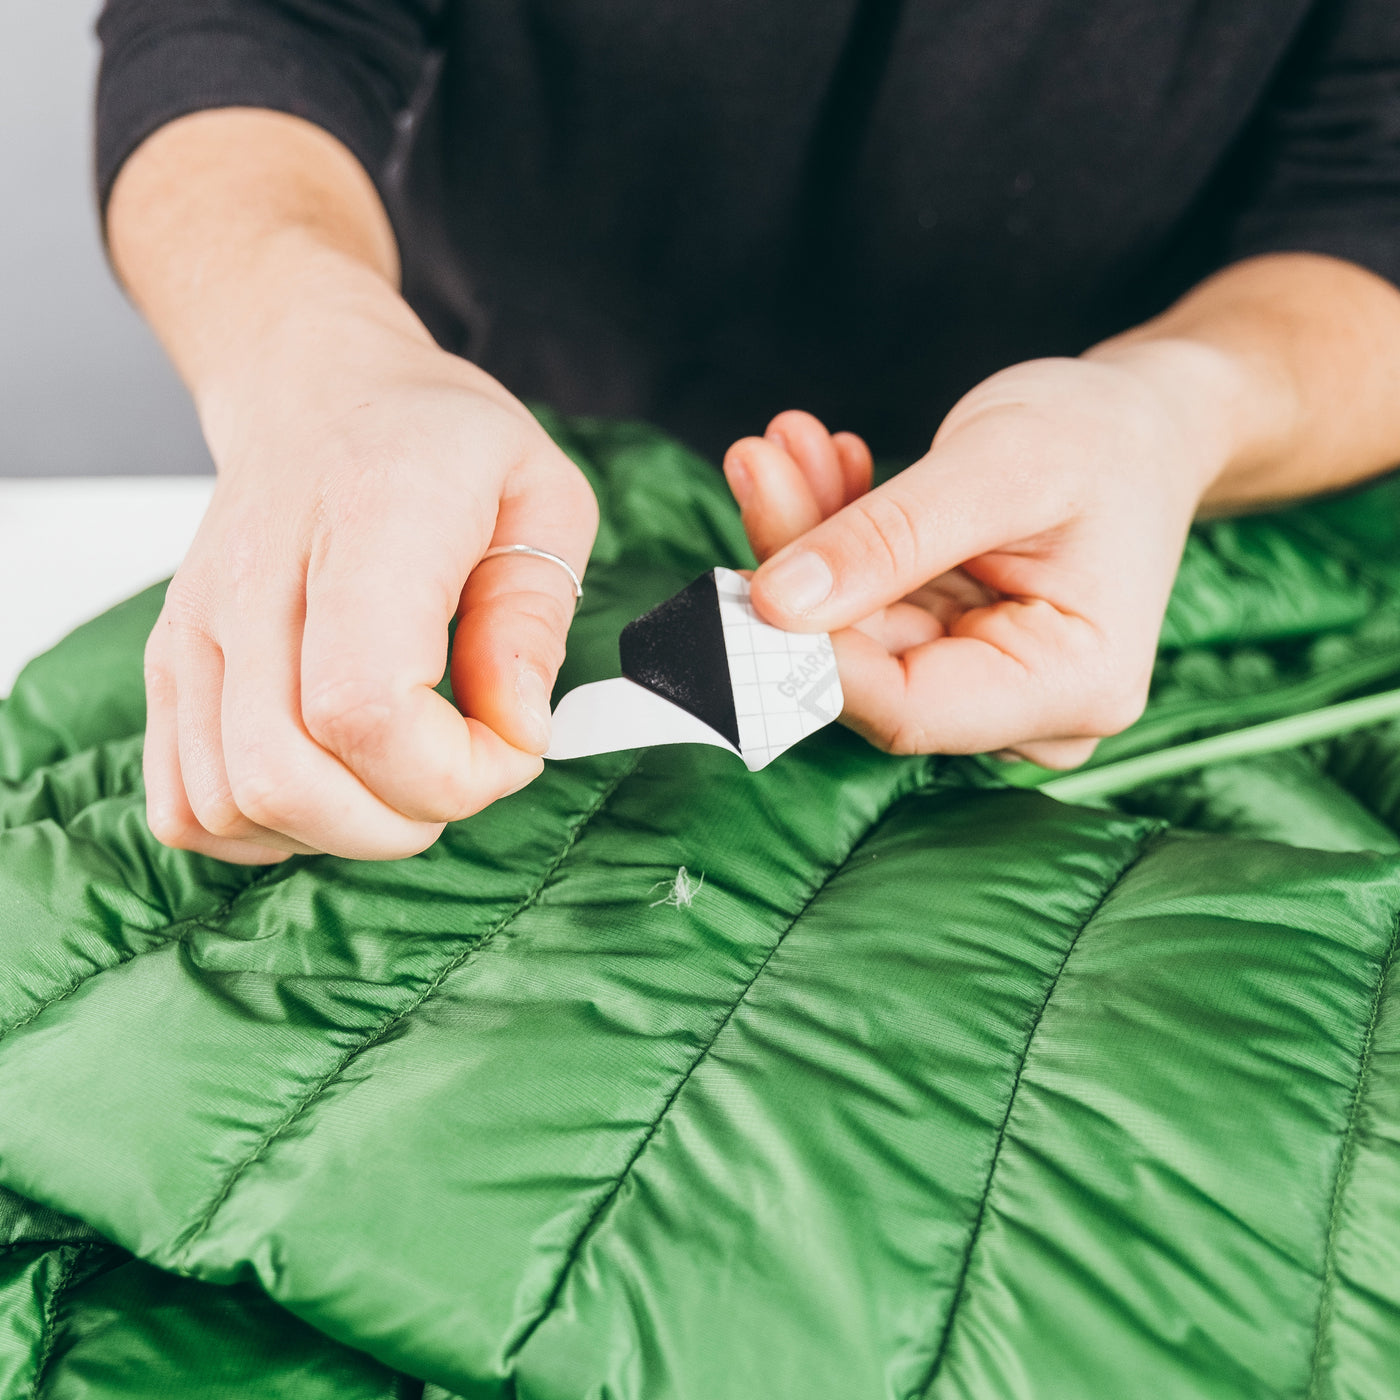 Tenacious Tape 101: How to Patch Sleeping Pads, Puffy Jackets